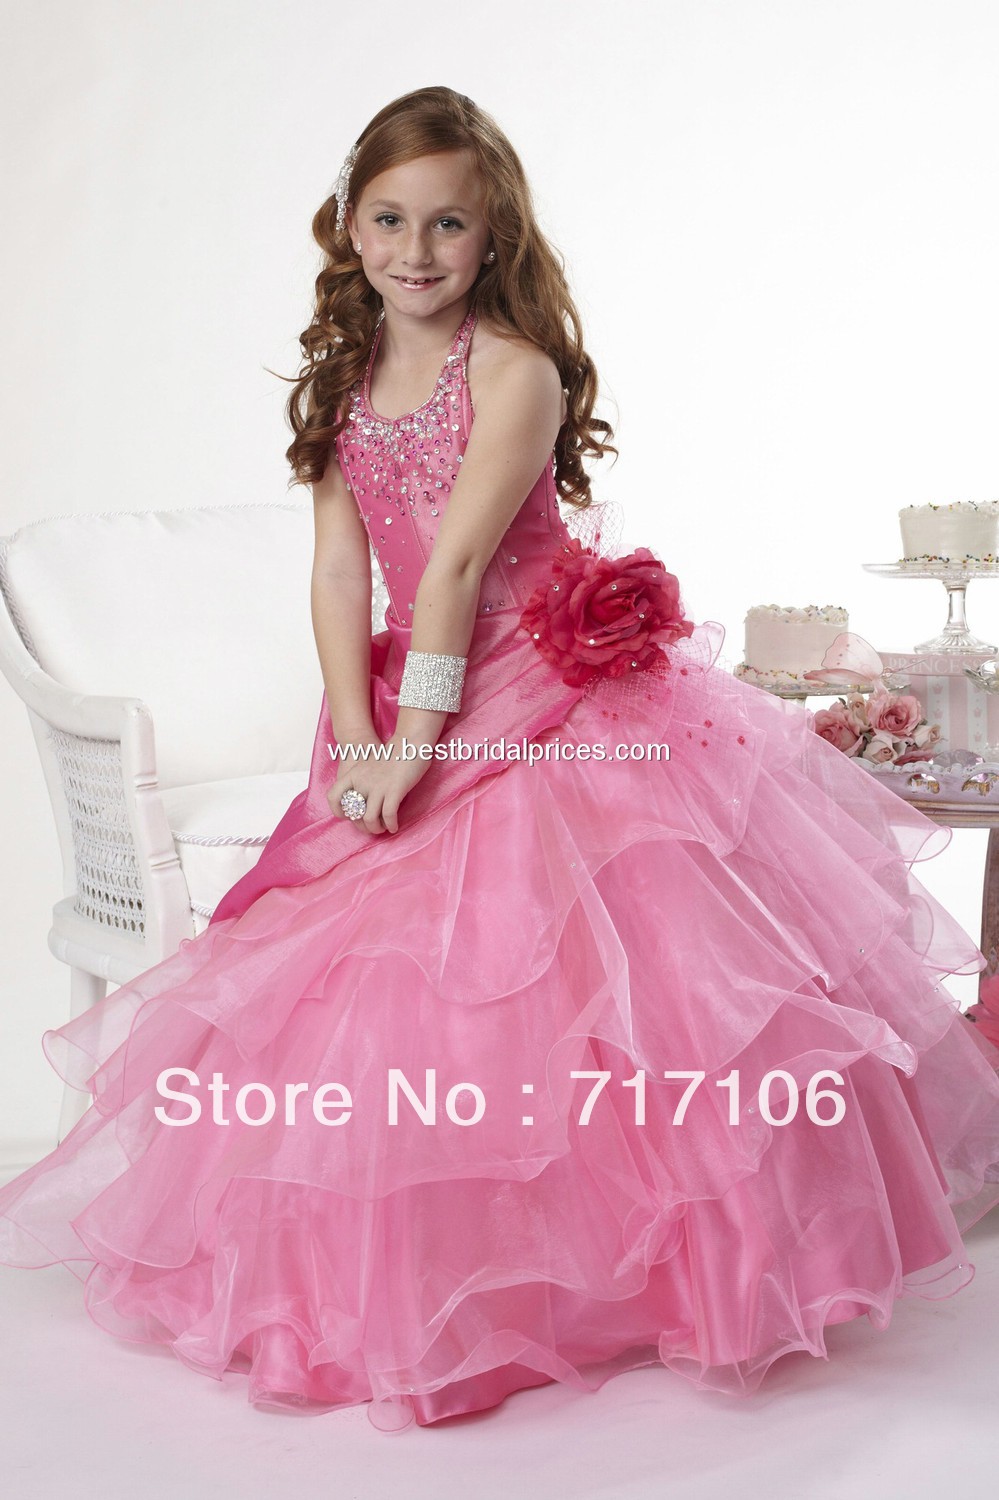 F06 Halter hot sell Free Shipping Fashion New Beaded Organza Lovely Pageant Girl's Party Princess Flower Girl Dresses Gowns